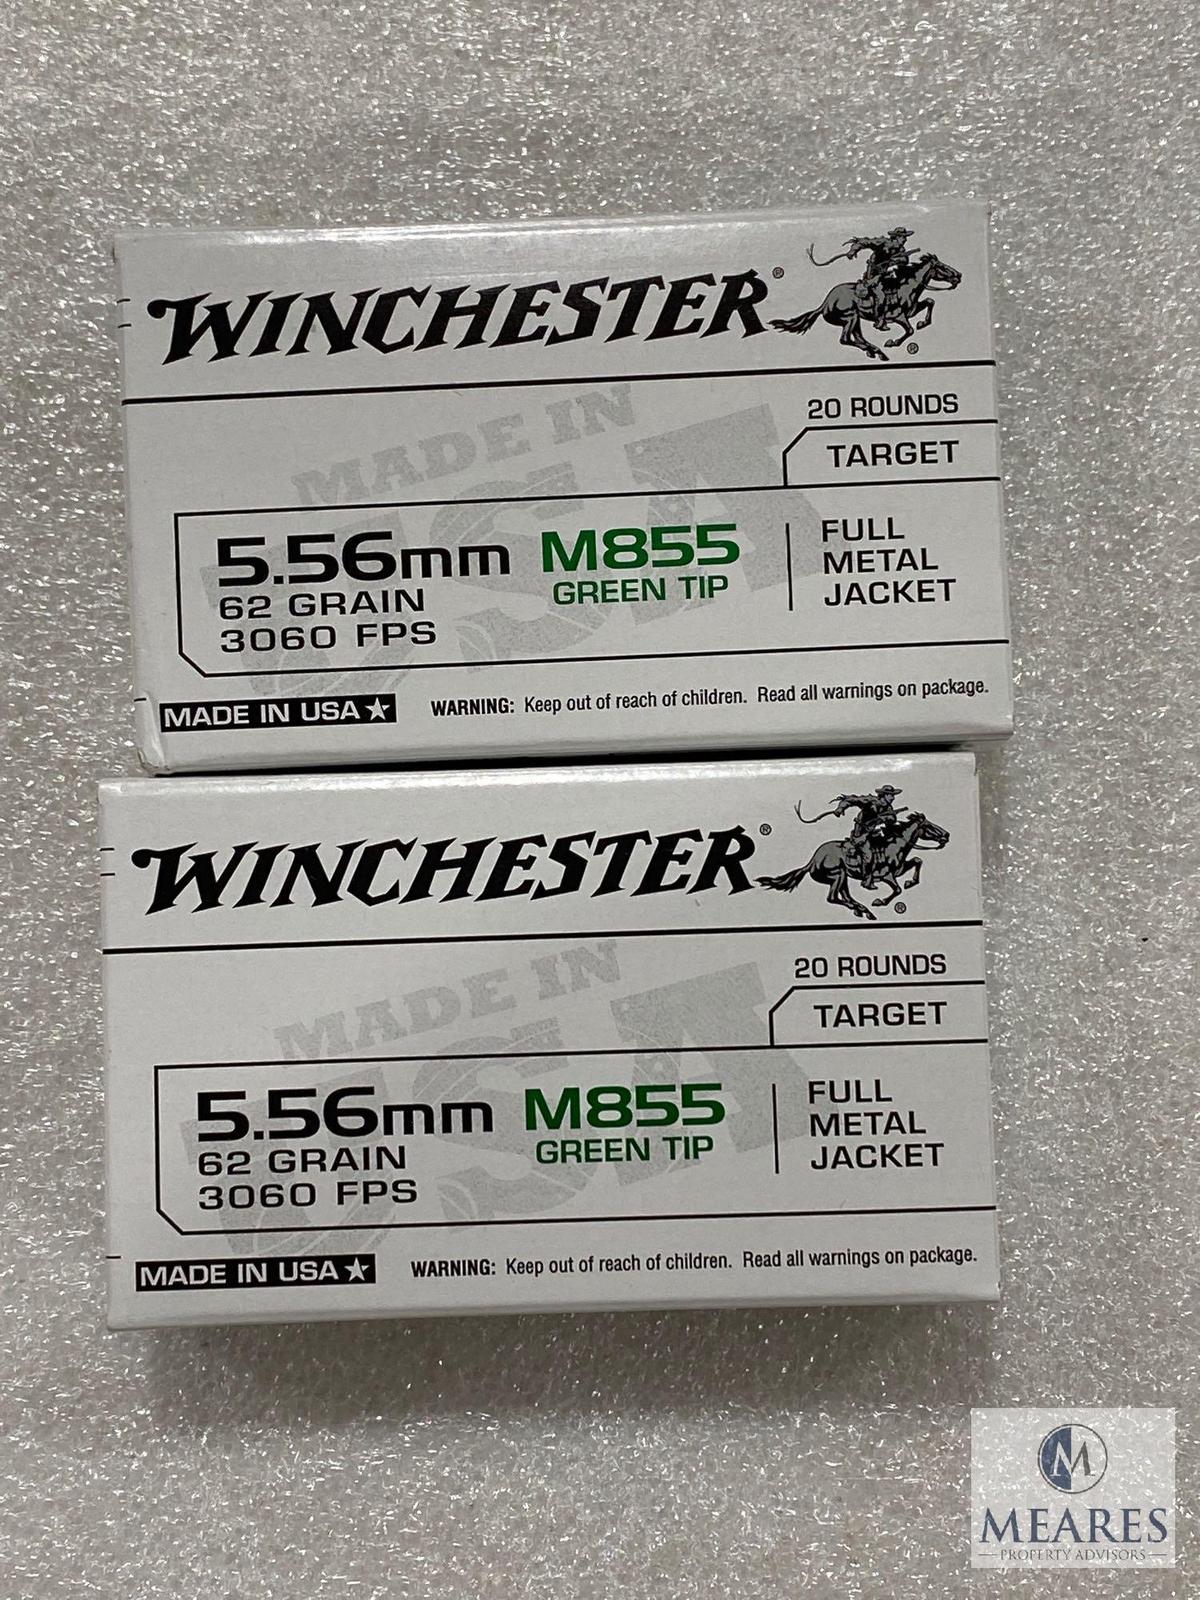 40 Rounds Winchester 5.56mm M855 Green Tip 62 Grain 3060 FPS FMJ